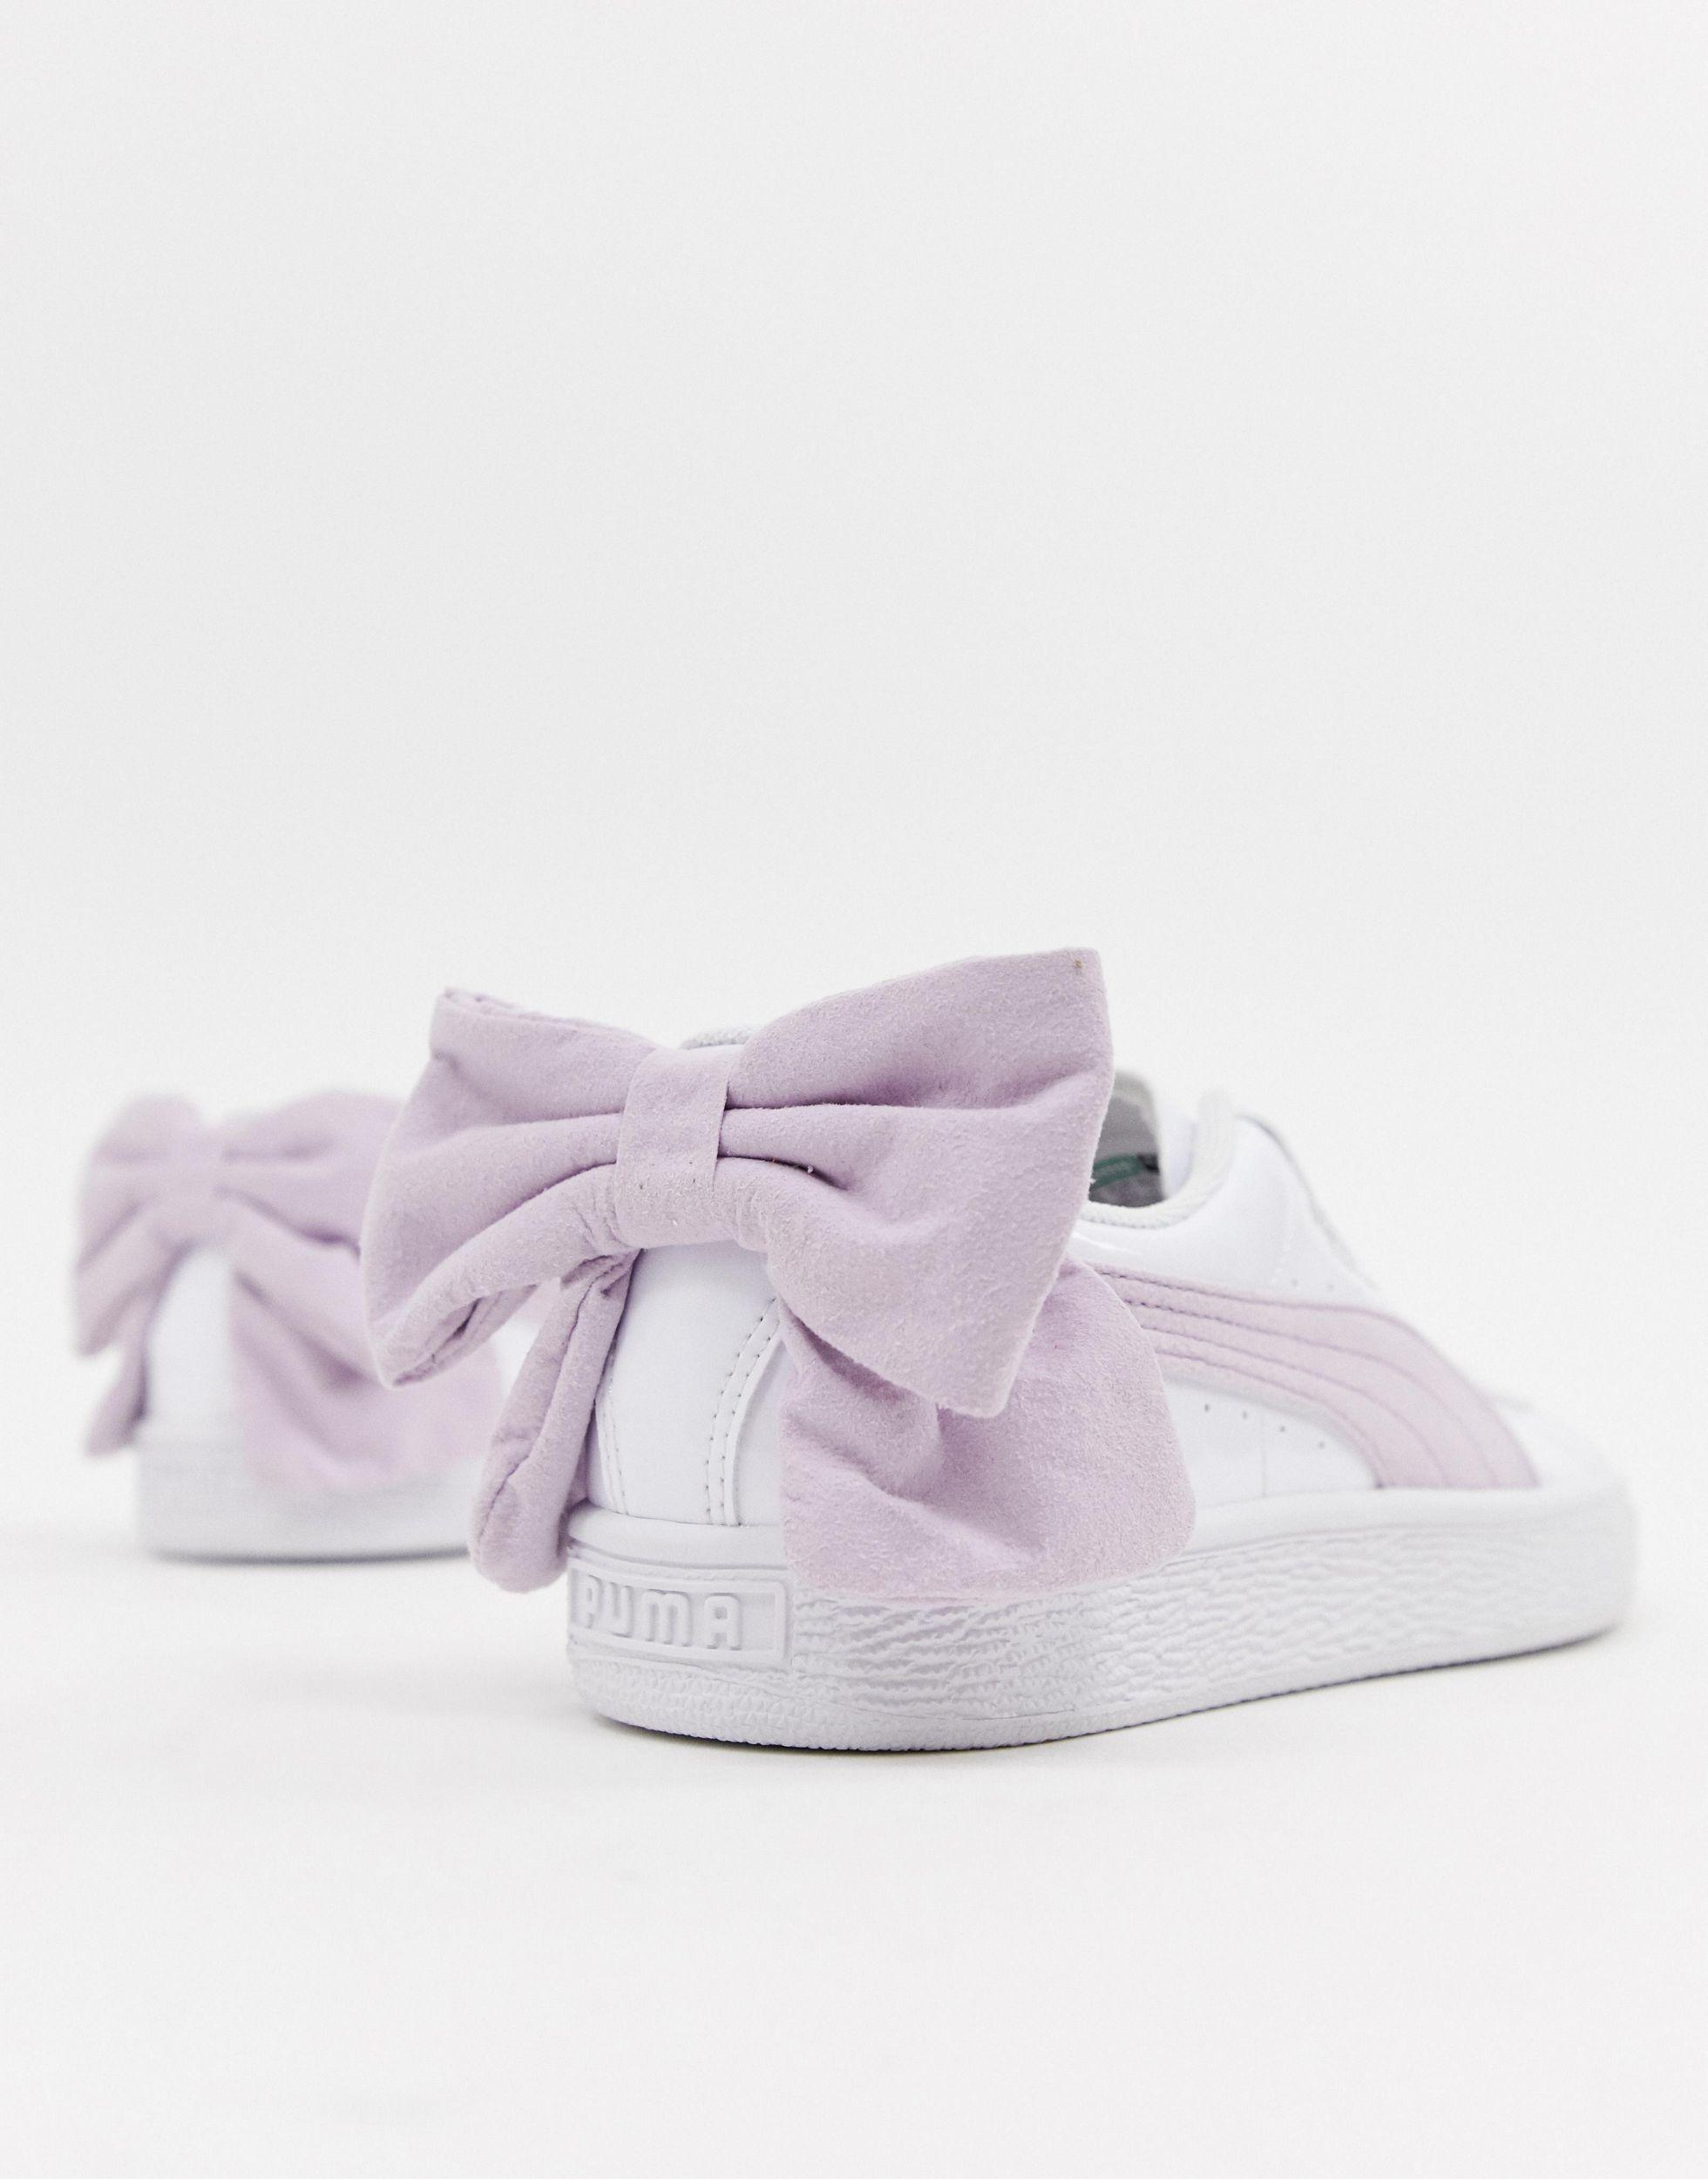 PUMA Suede Basket Bow White Trainers in Pink | Lyst